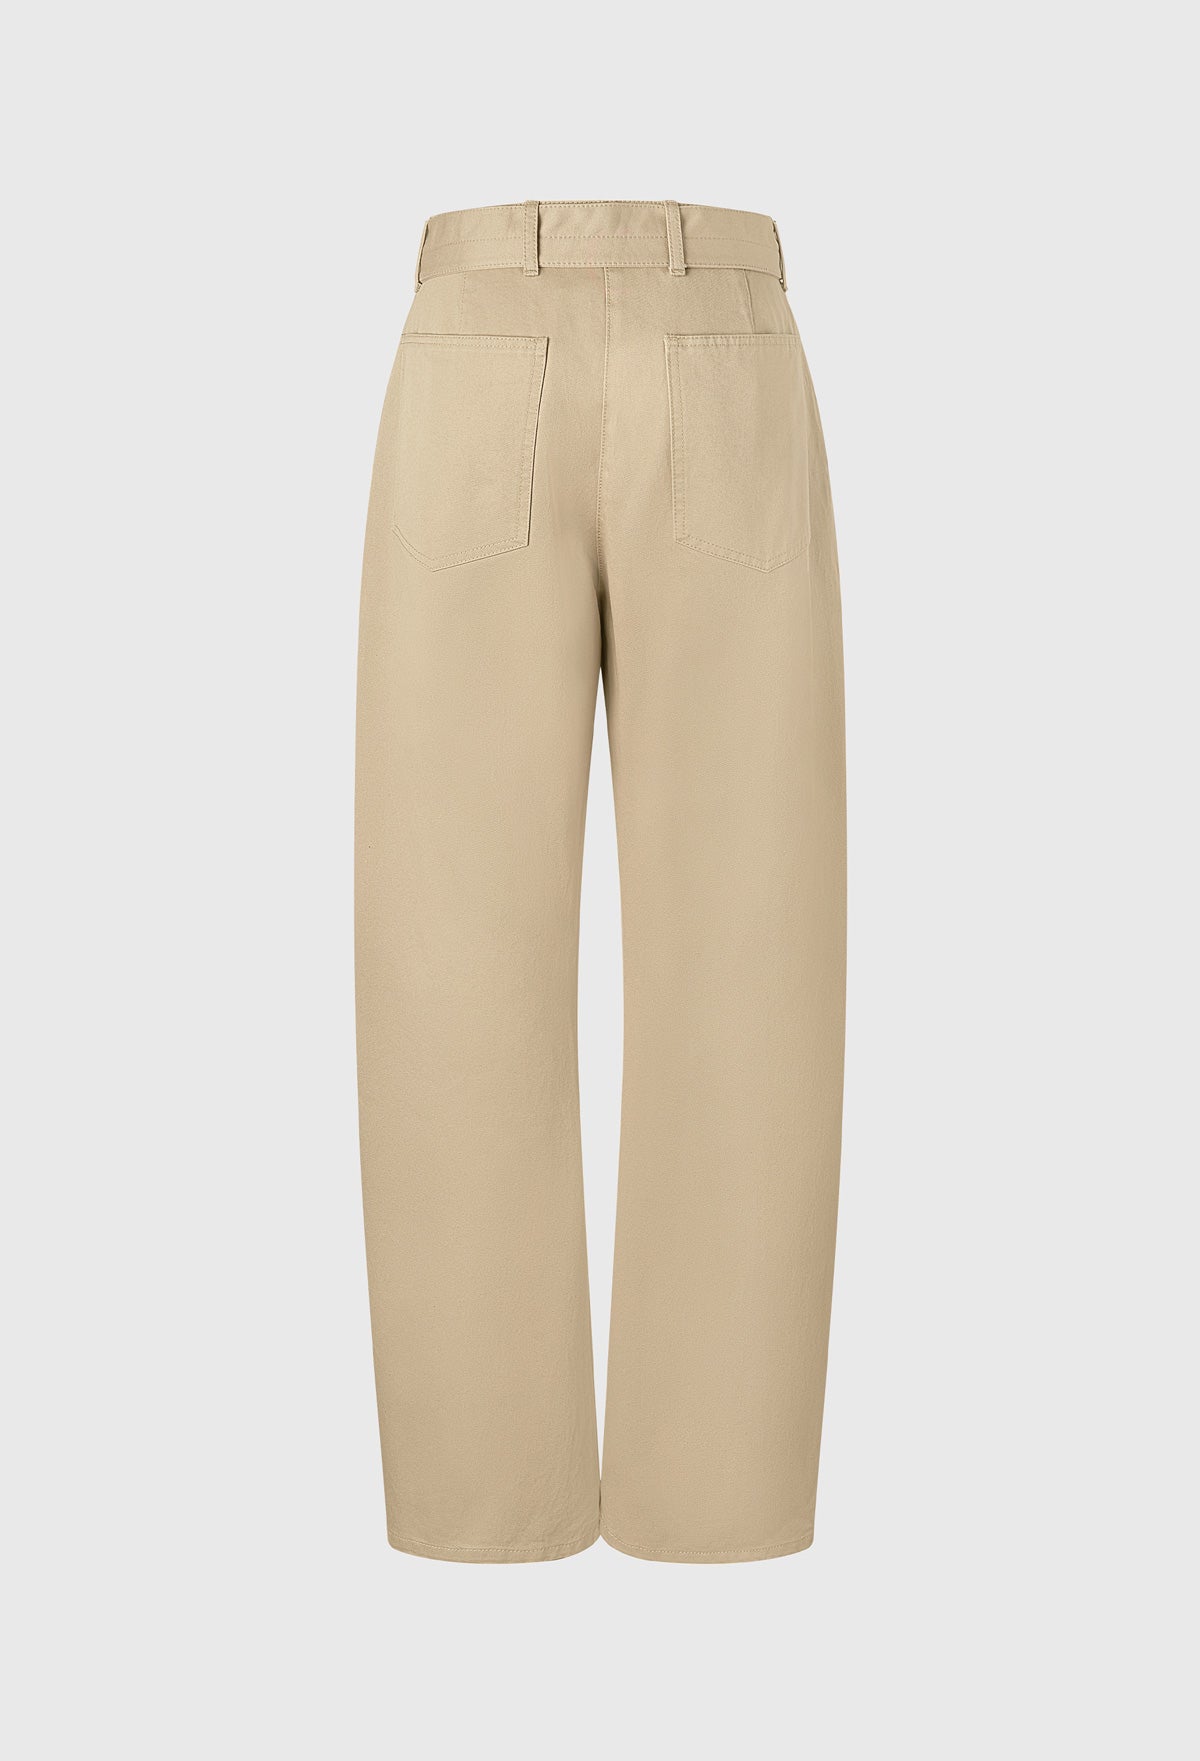 Belted Cotton Pants In Beige